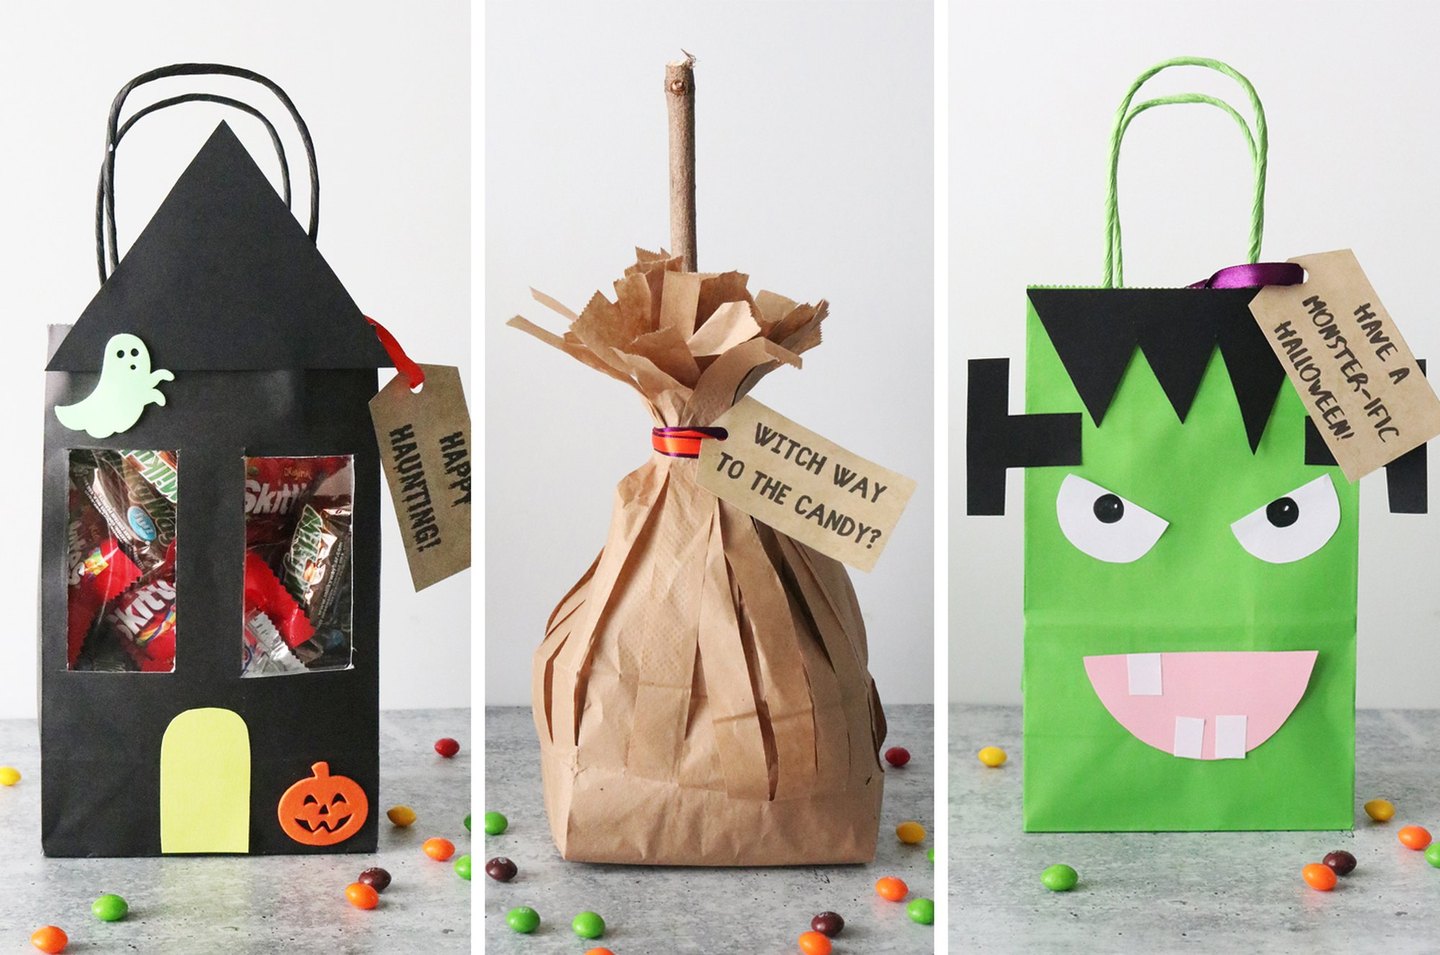 Three small Halloween bags for candy